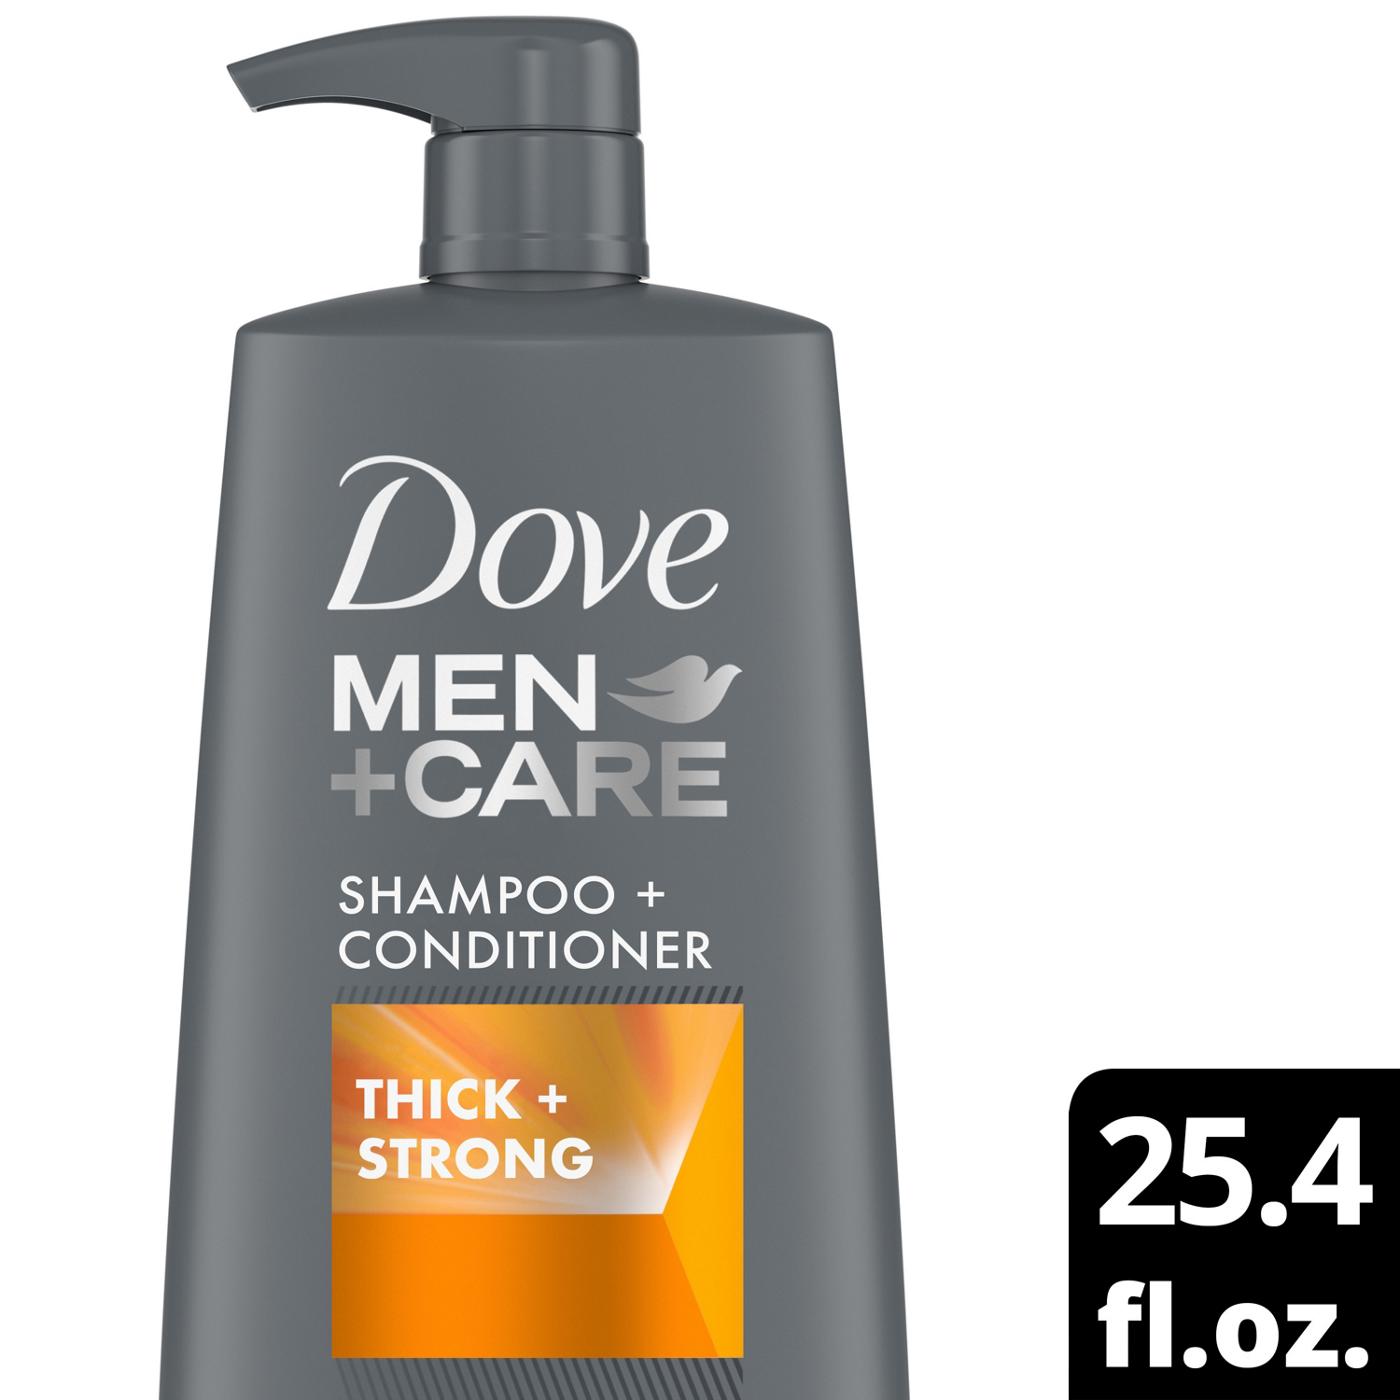 Dove Men+Care Shampoo + Conditioner - Thick & Strong; image 4 of 6